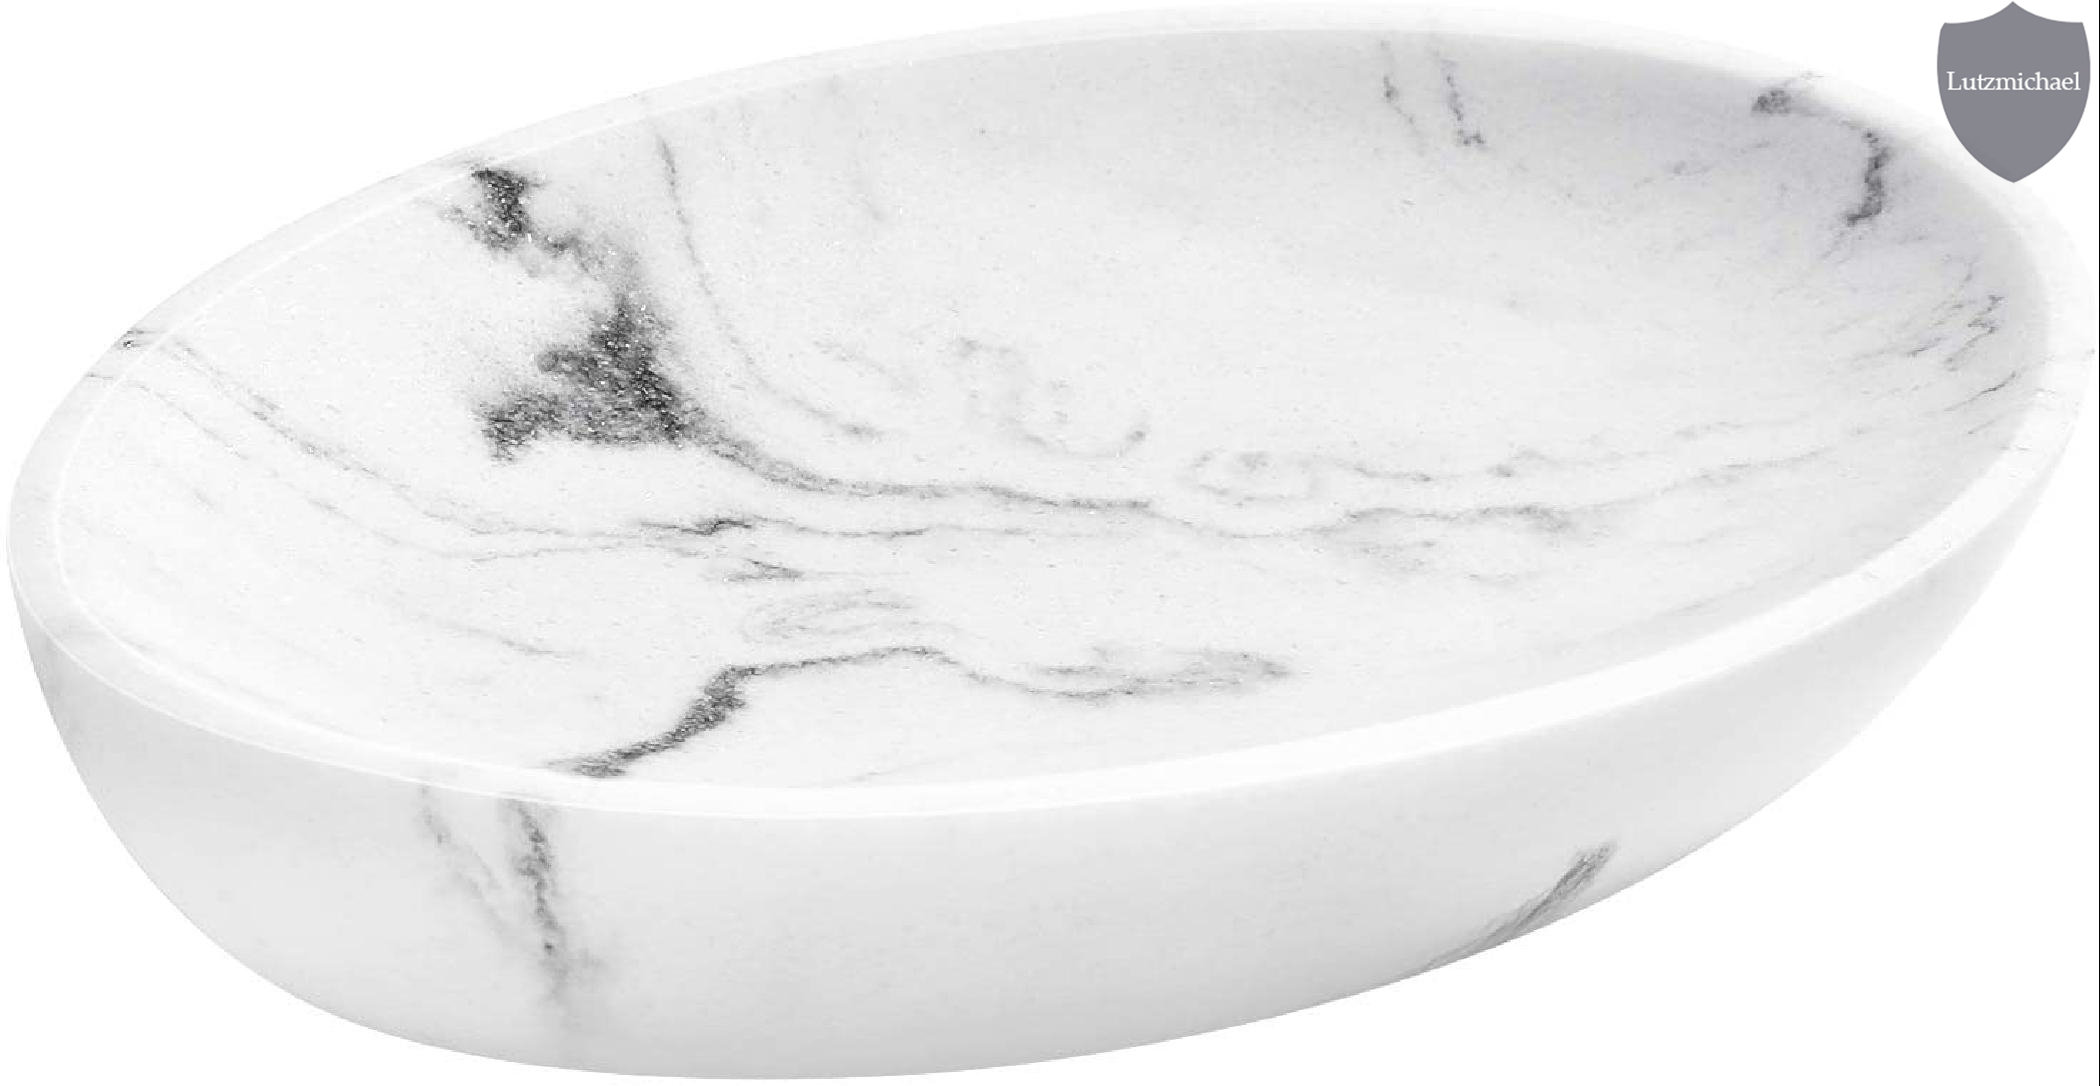 Self Draining Soap Dish, Marble Look Soap Dishes for Bar Soap, Shower Soap Holder Sponge Holder Soap Tray Soap Savers Ivy Bronx